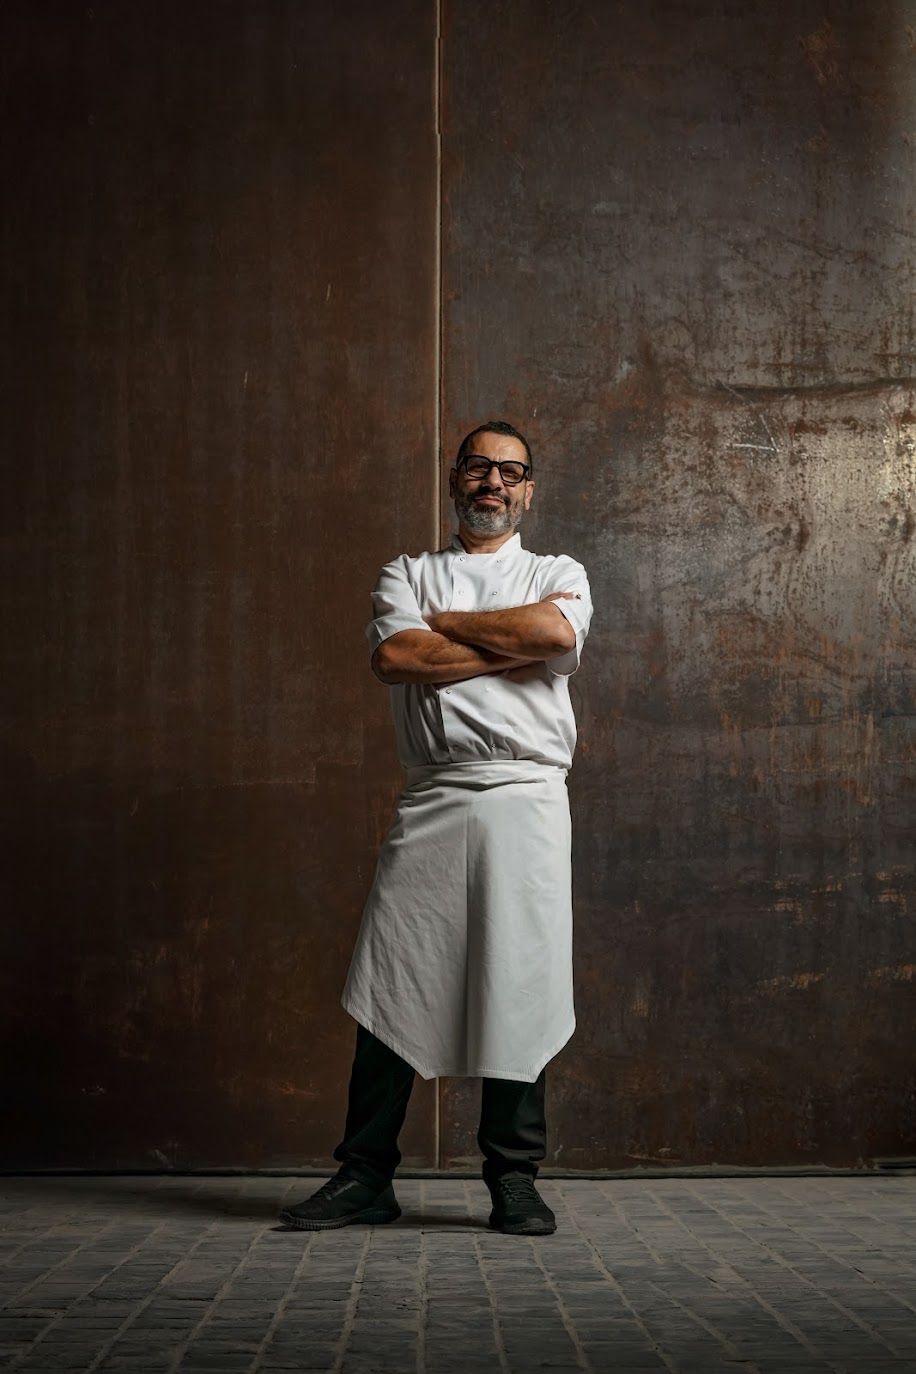 Man wearing glasses, chef whites and apron stands with arms folded and a relaxed neutral expression against a metal wall.